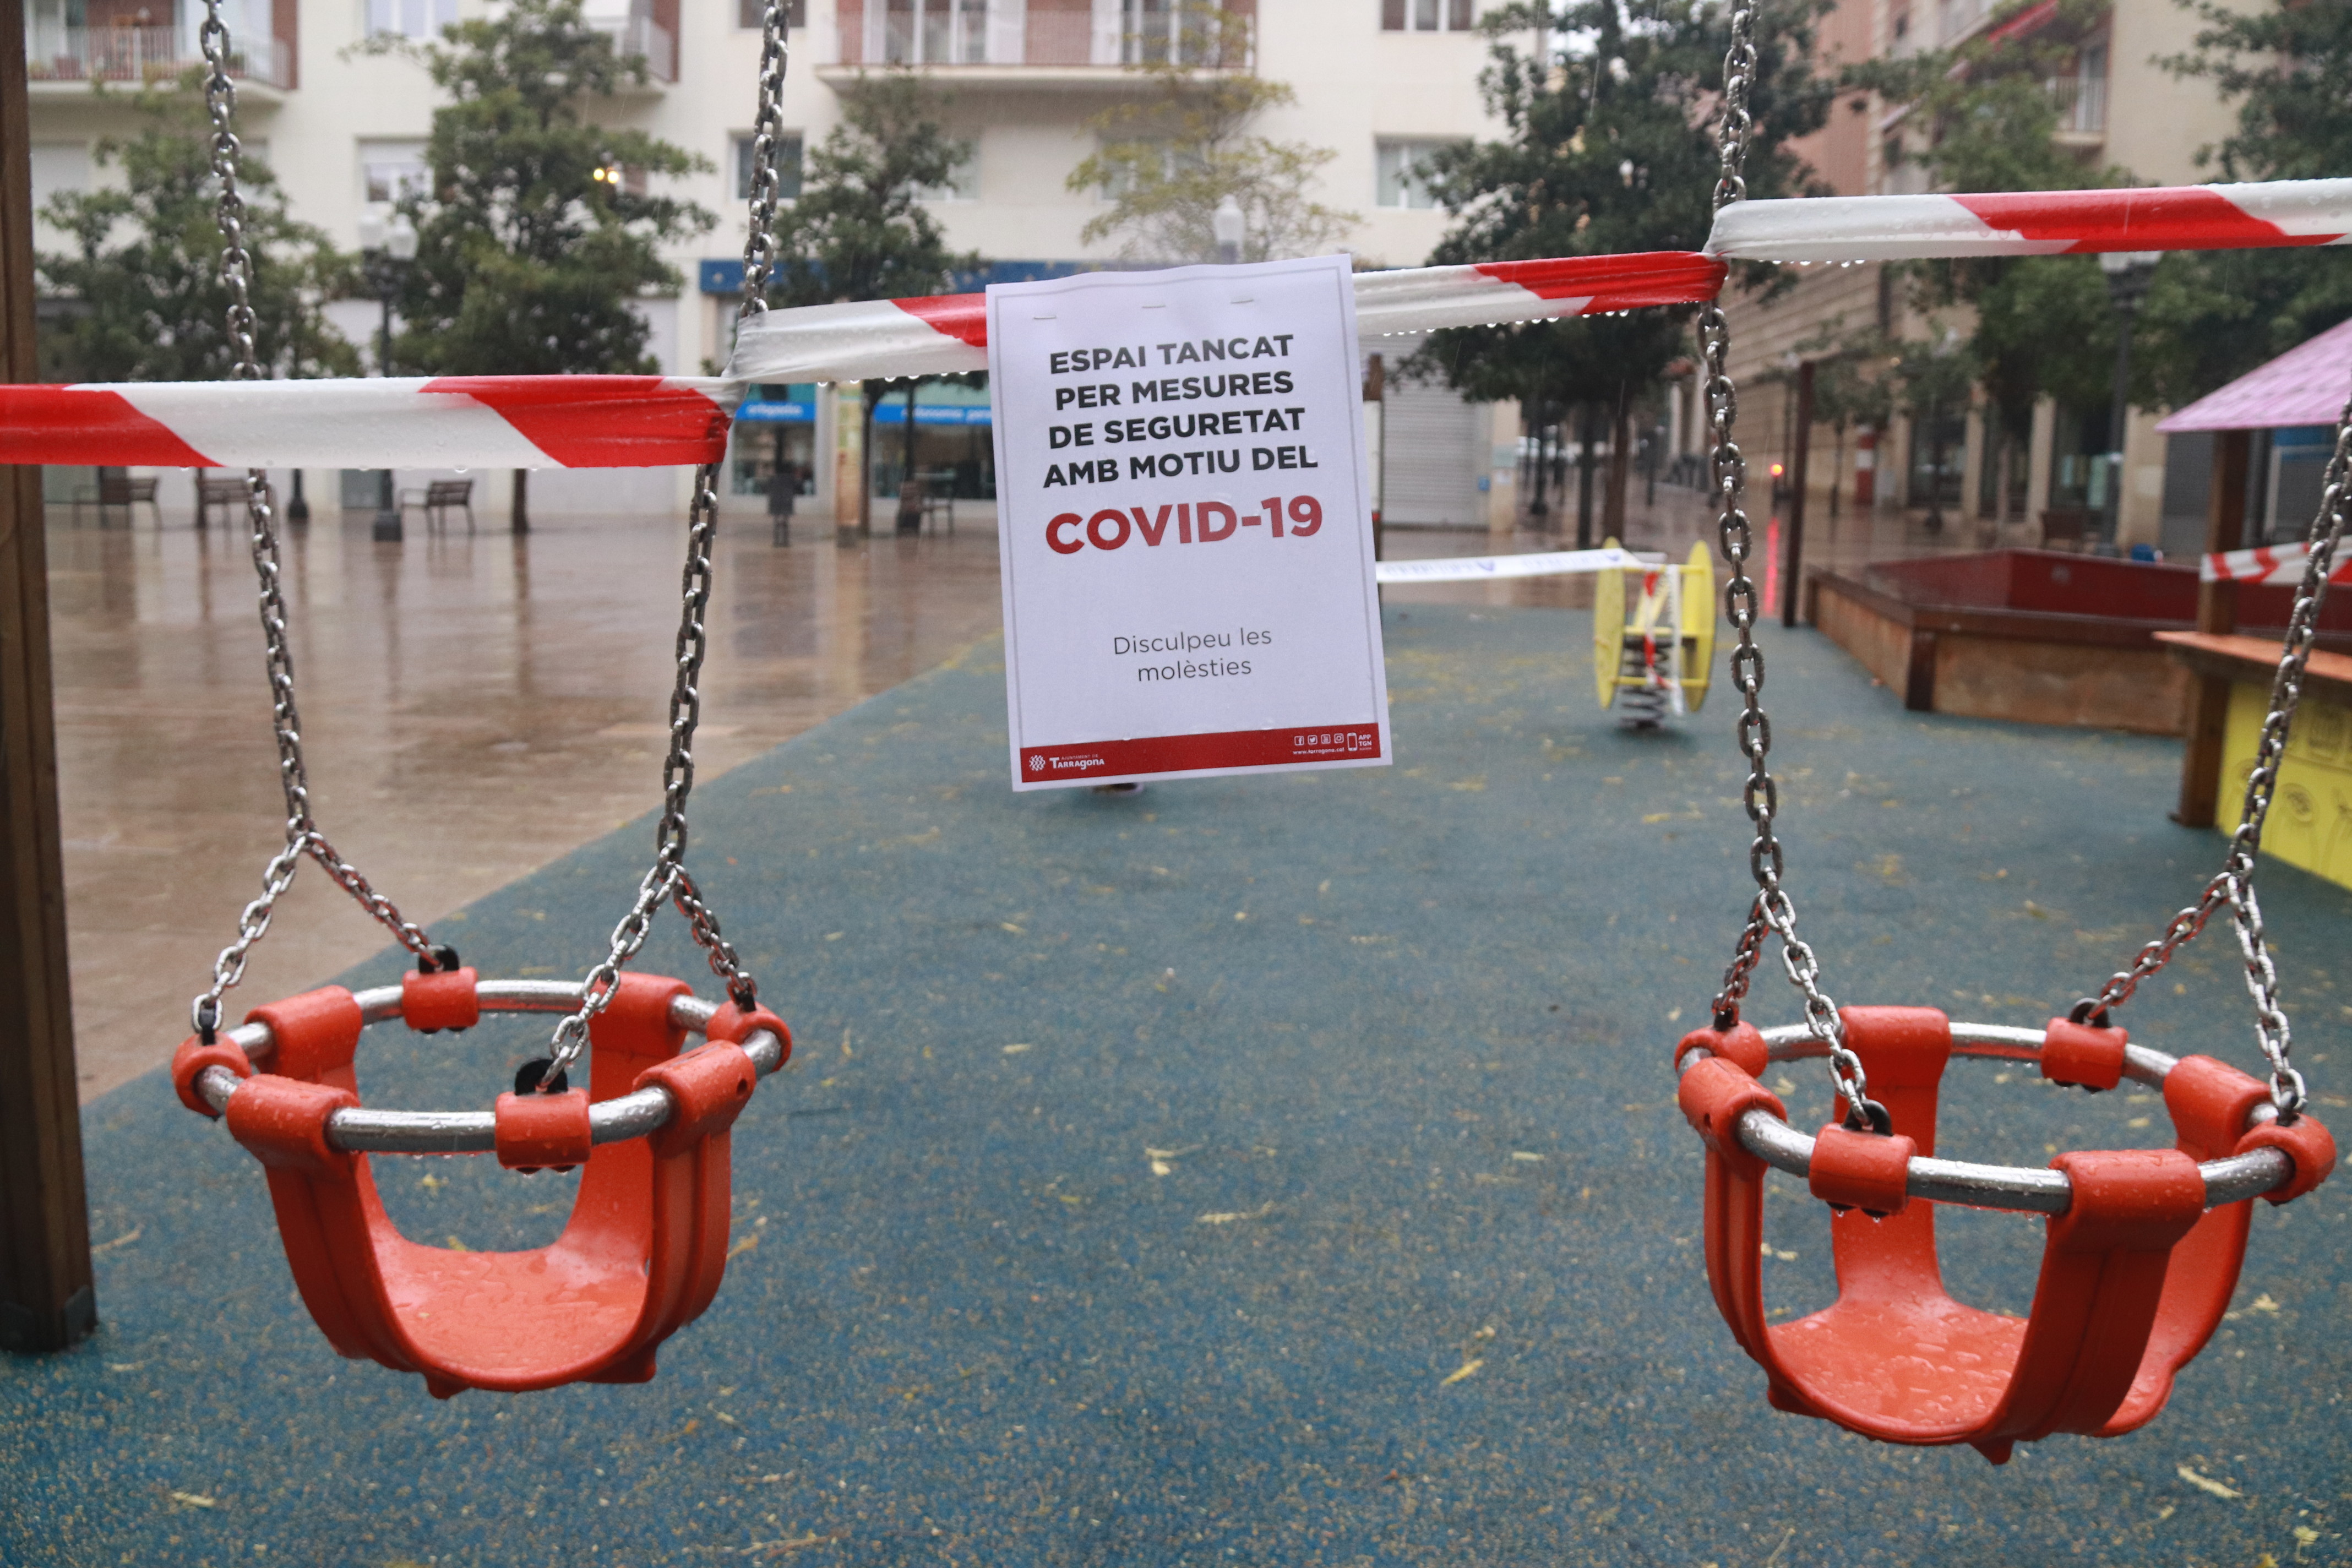 Children's play area in Tarragona closed off due to coronavirus (by Eloi Tost)